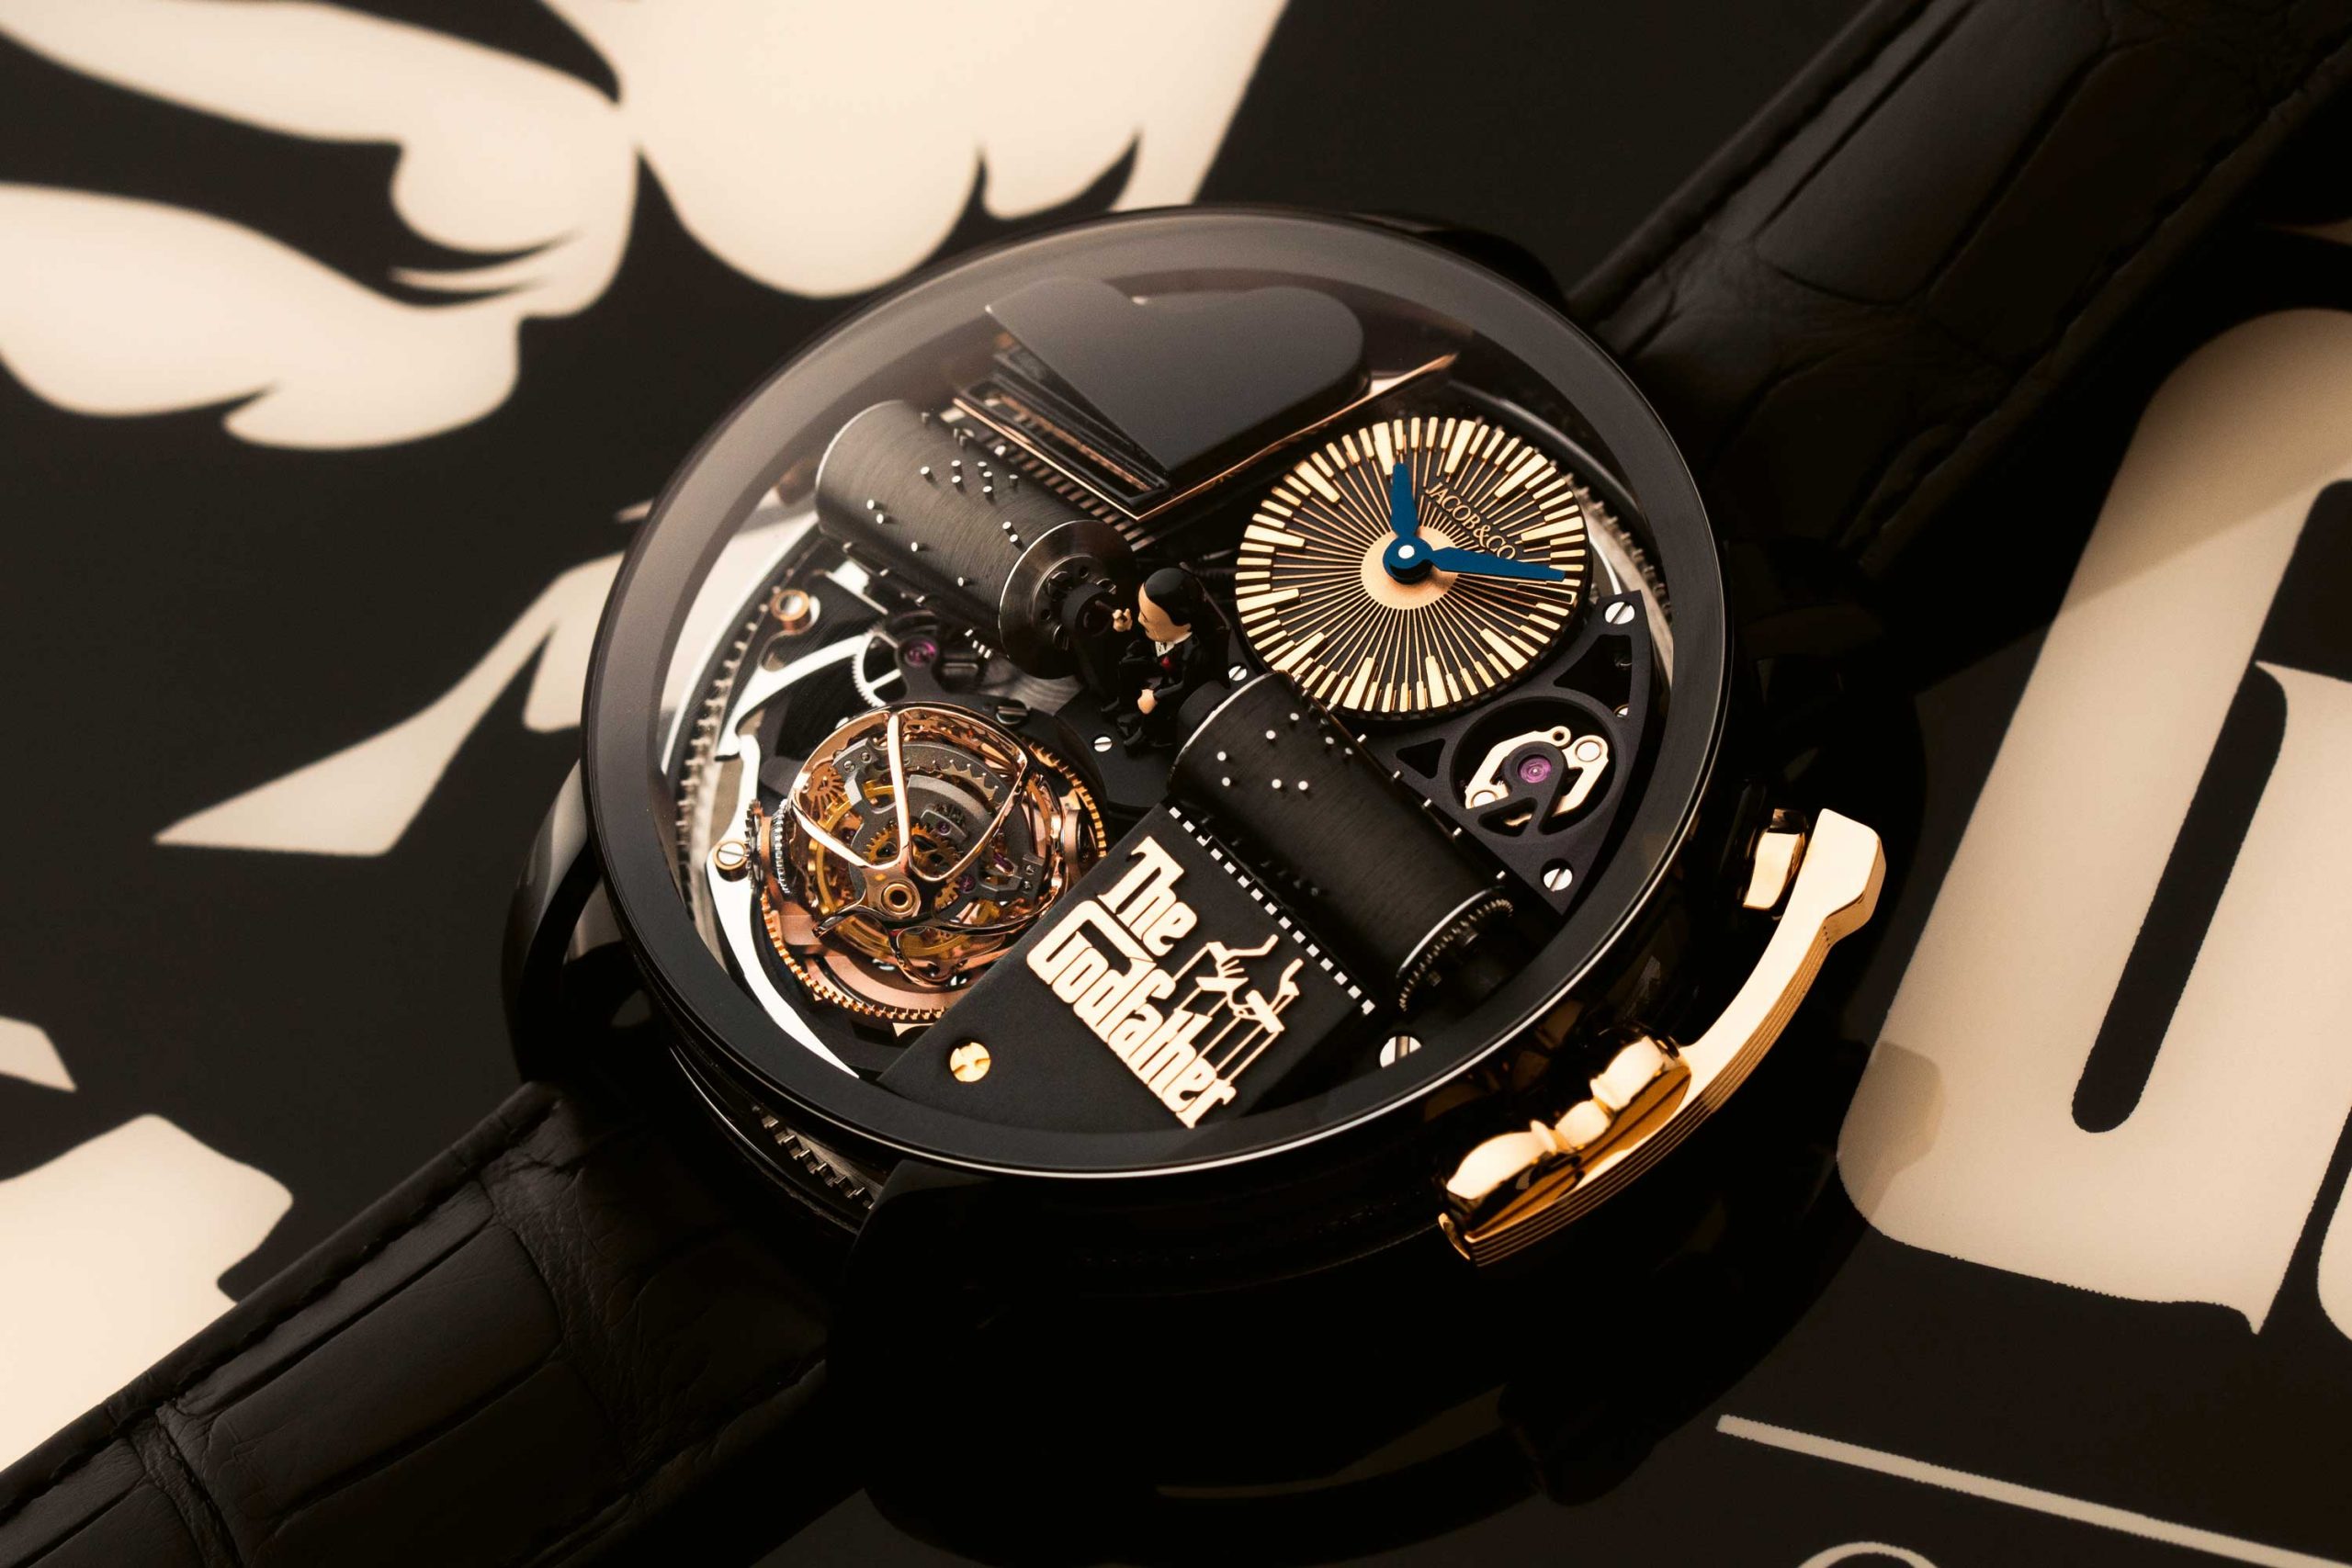 The Opera Godfather Musical Watch in black DLC and grade 5 titanium